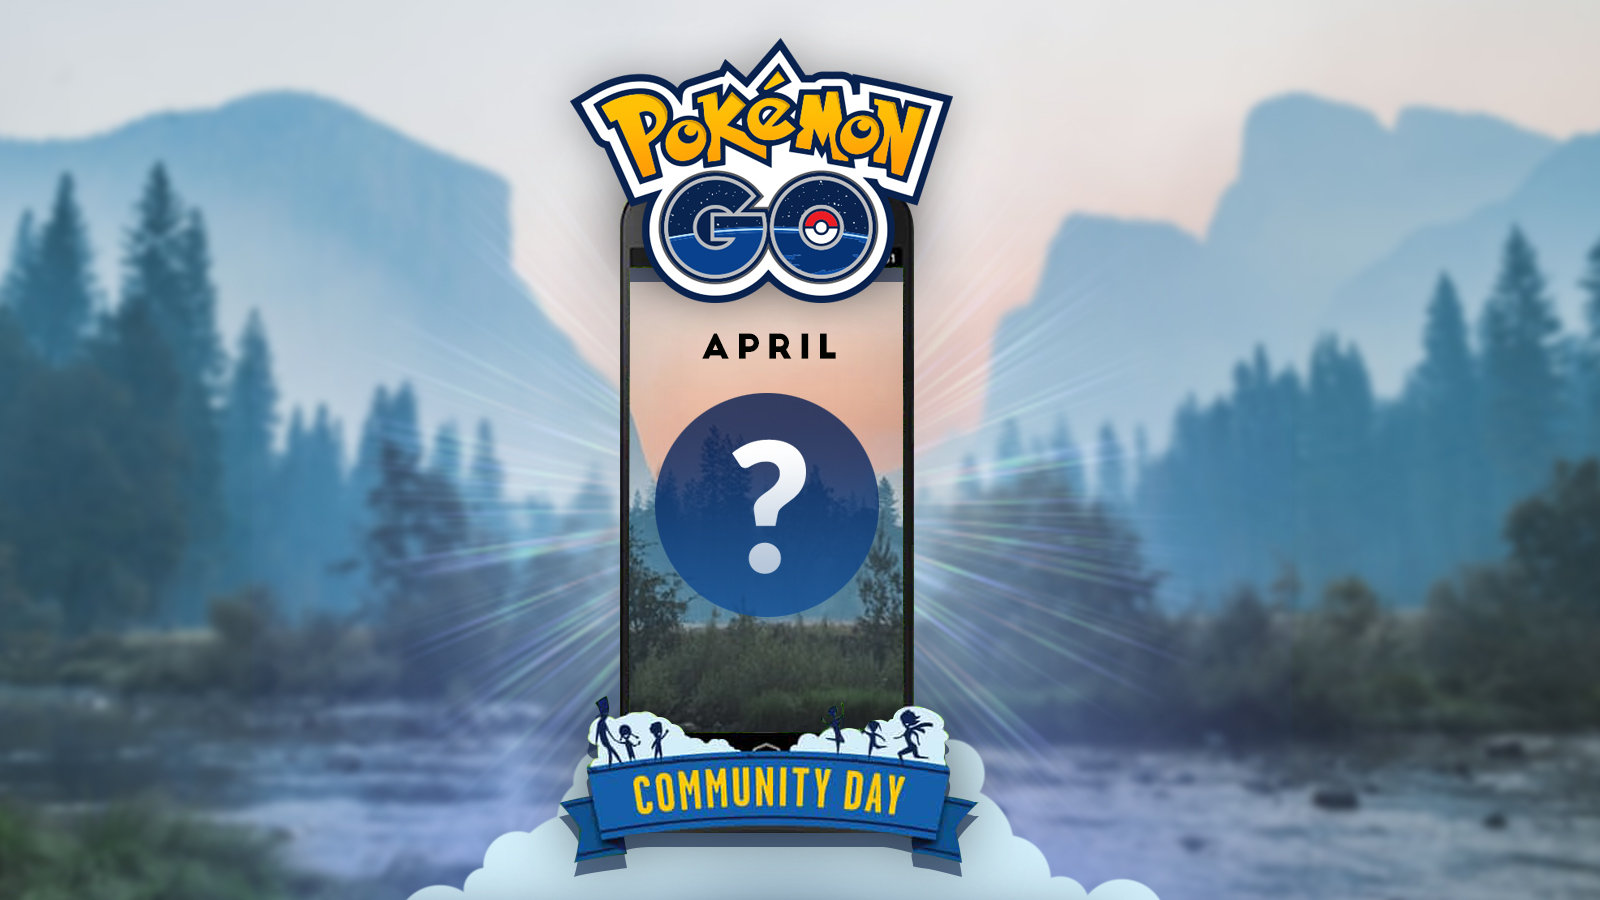 What’s happening with the Pokemon Go April Community Day? Dexerto